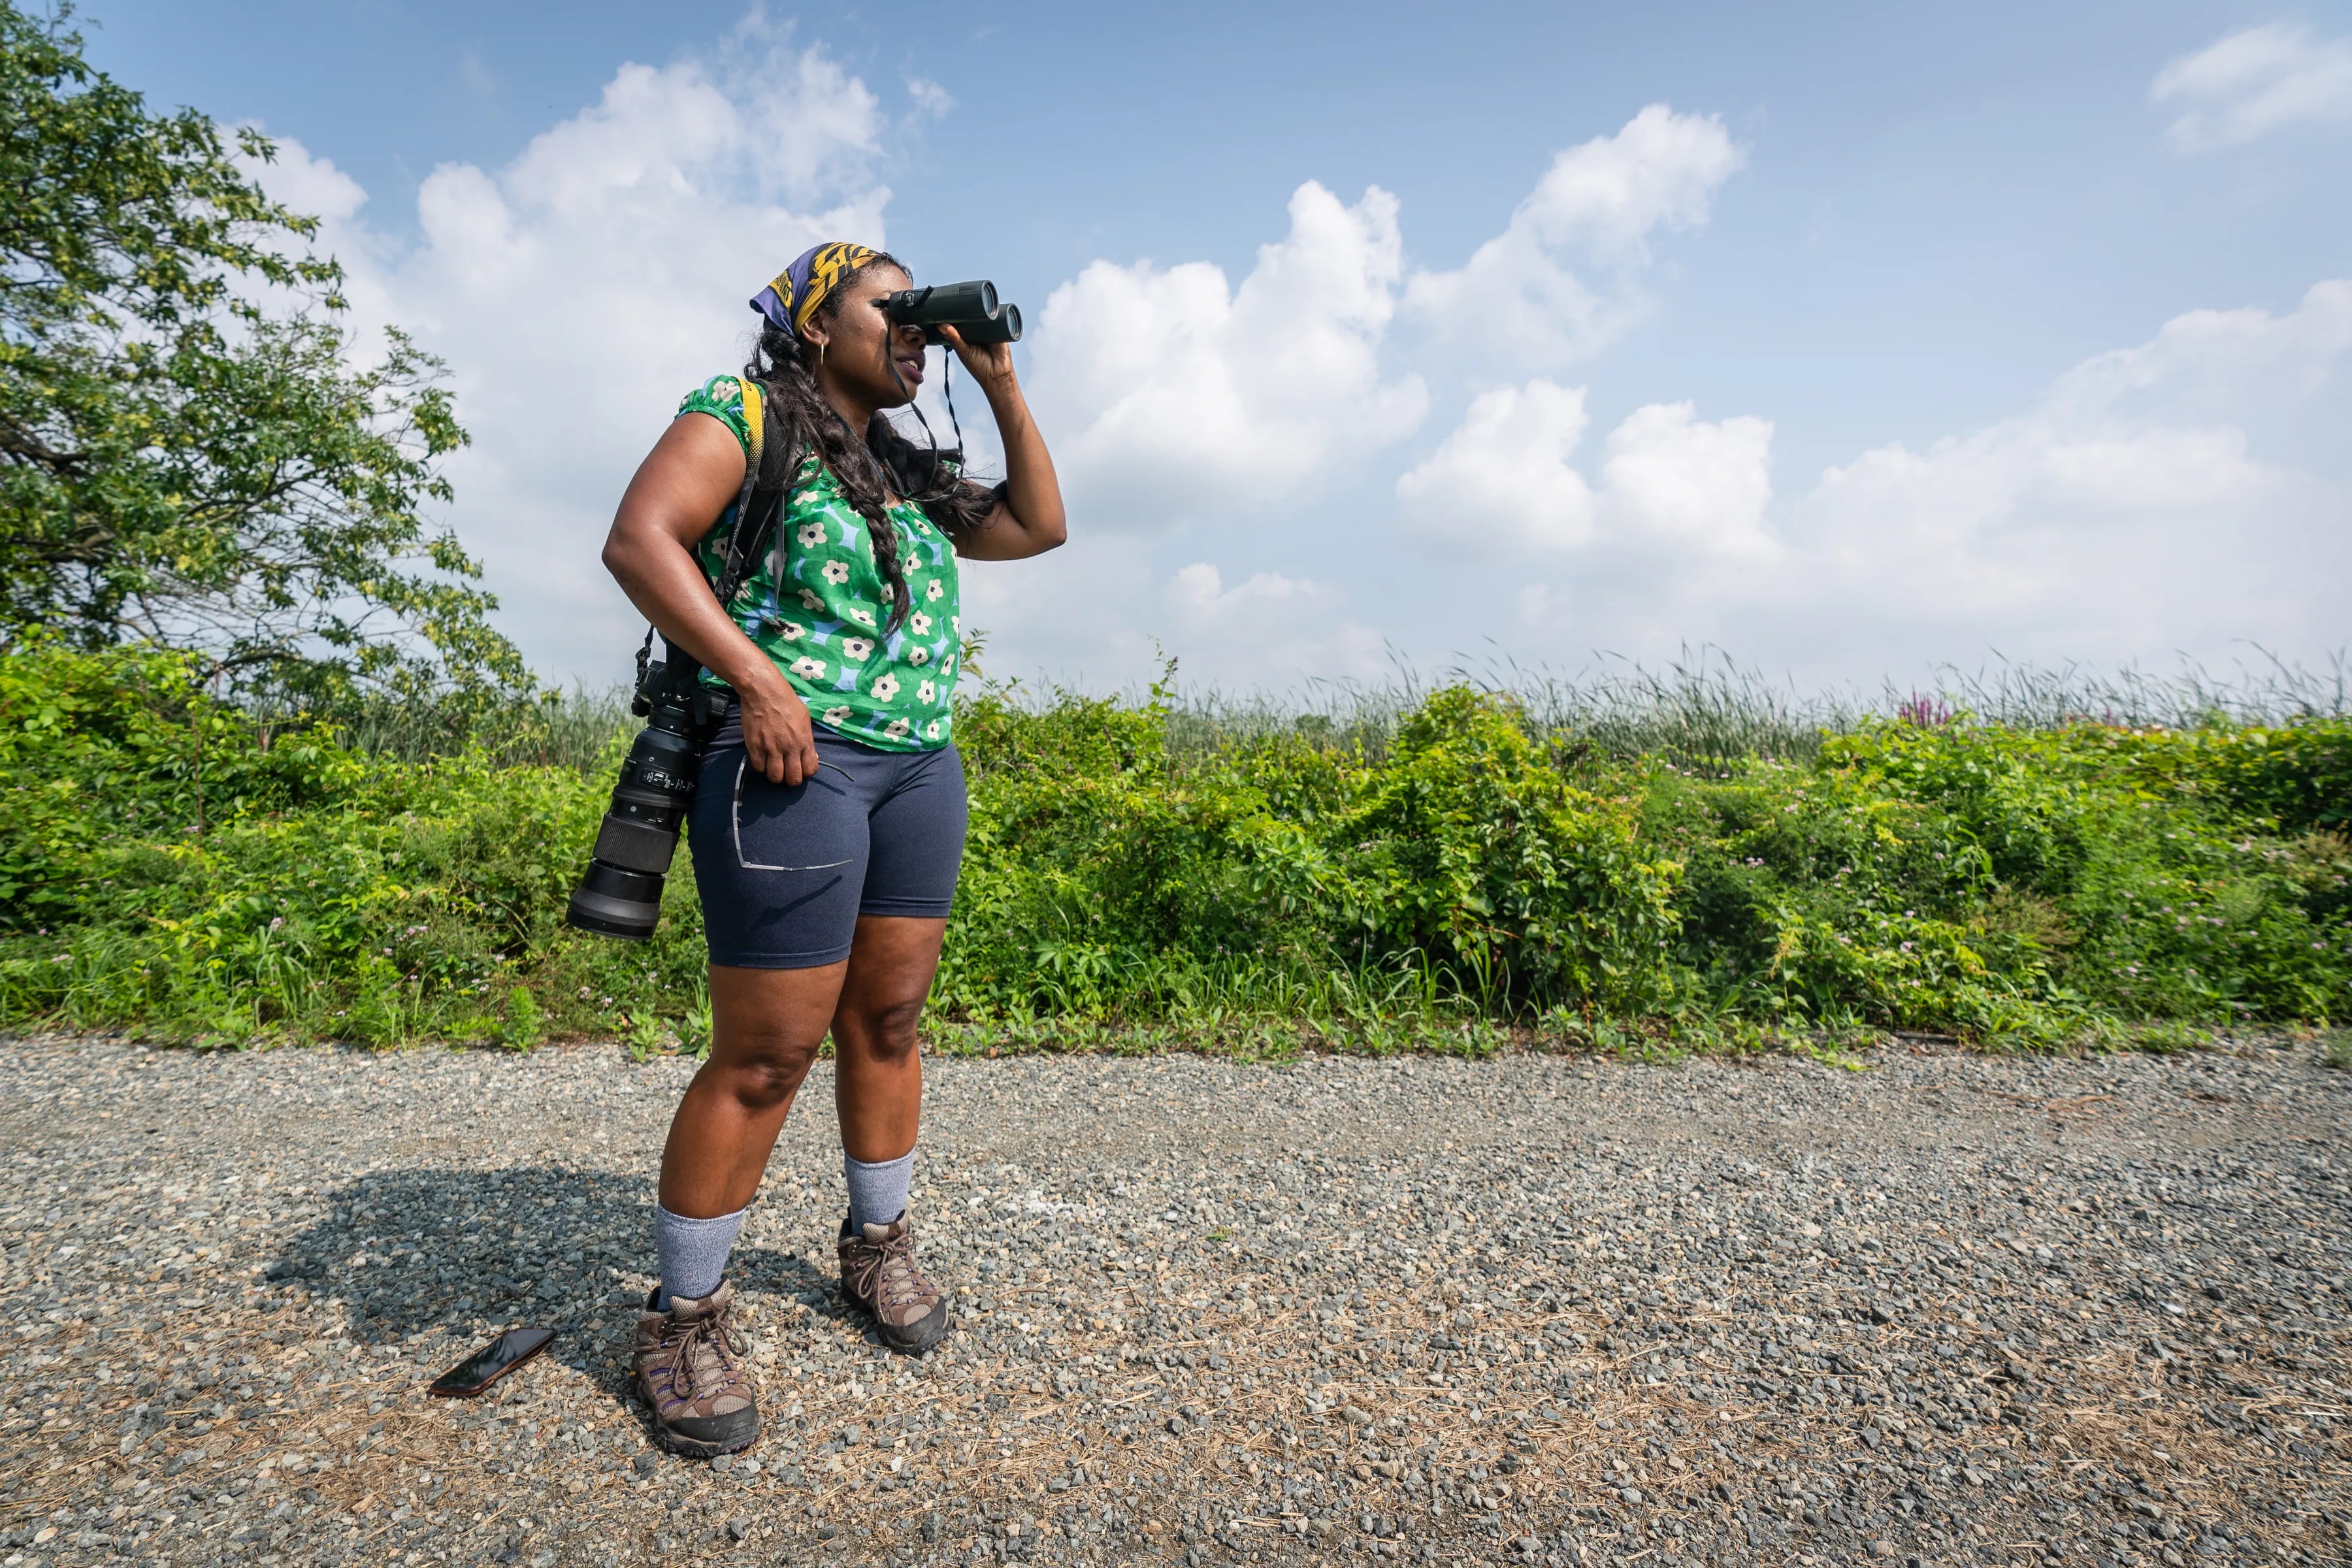 When Christy Hyman's son passed away, she turned to birding to find solace. She is shown here birding at John Heinz National Wildlife Refuge on July 20, 2023.